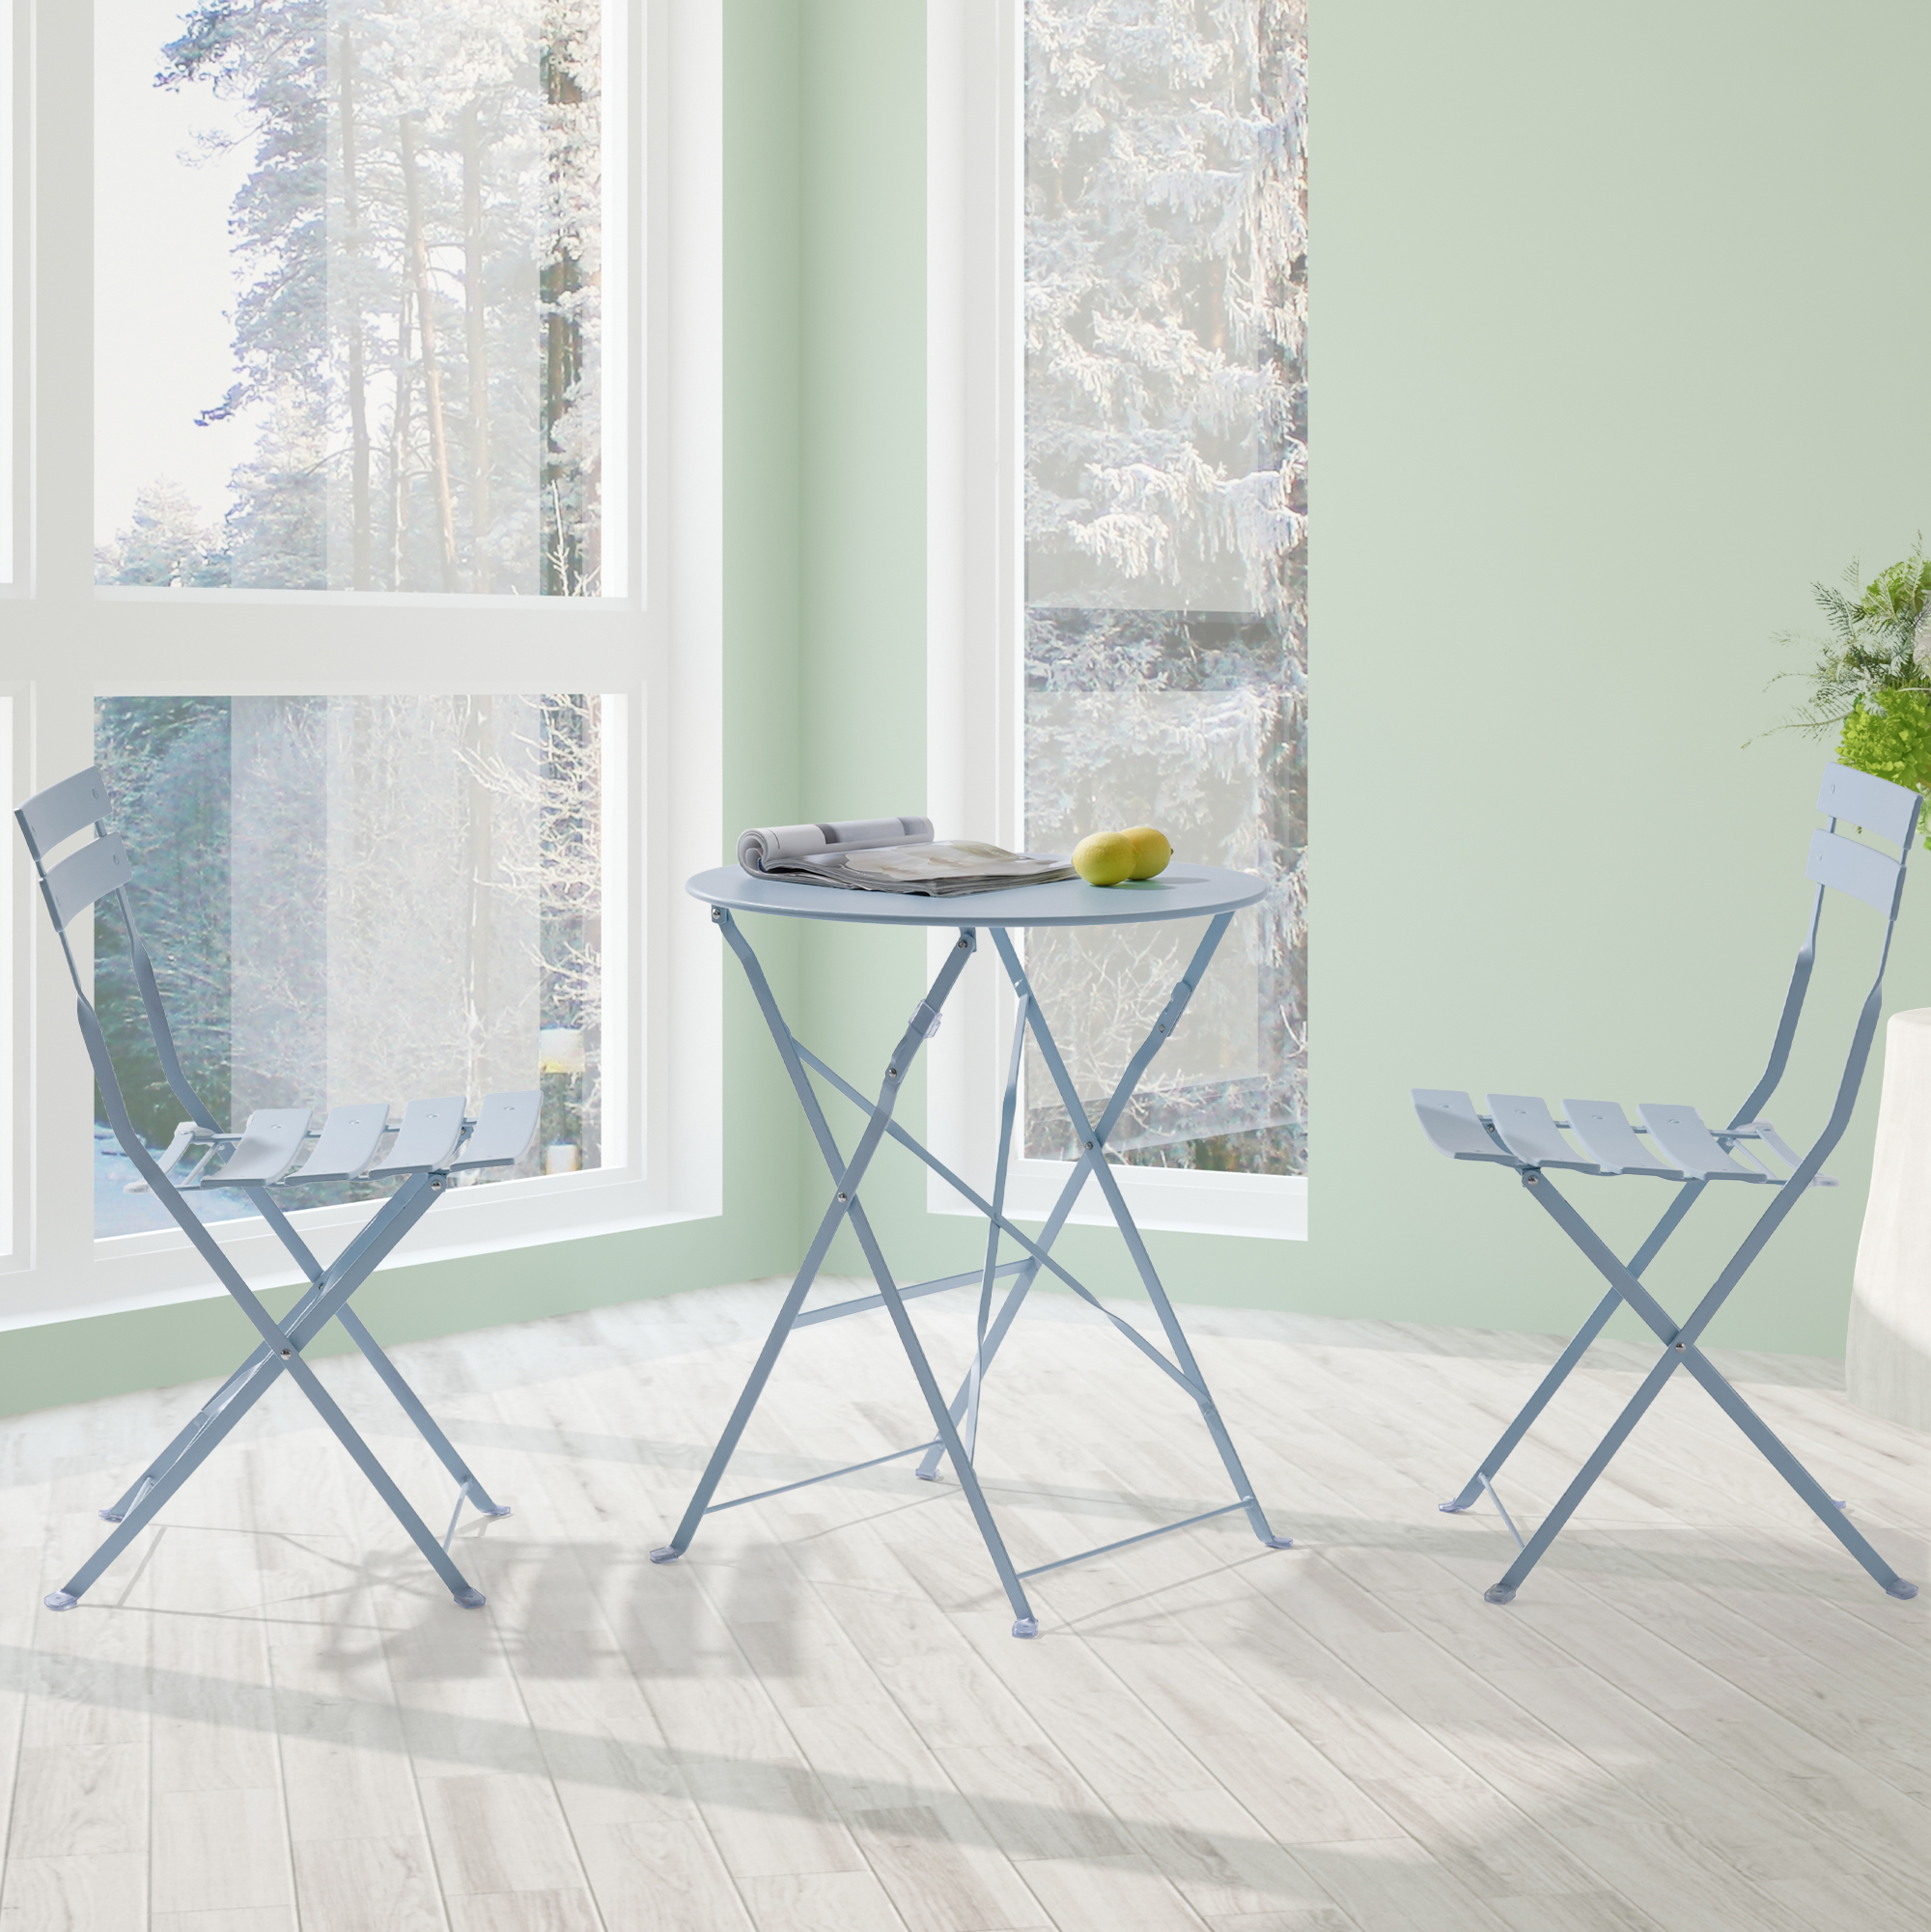 ACEGOSES 3 Pces Patio Folding Chairs with a Steel Frame Table for Garden, Deck and Yards,Turquoise blue - image 1 of 7